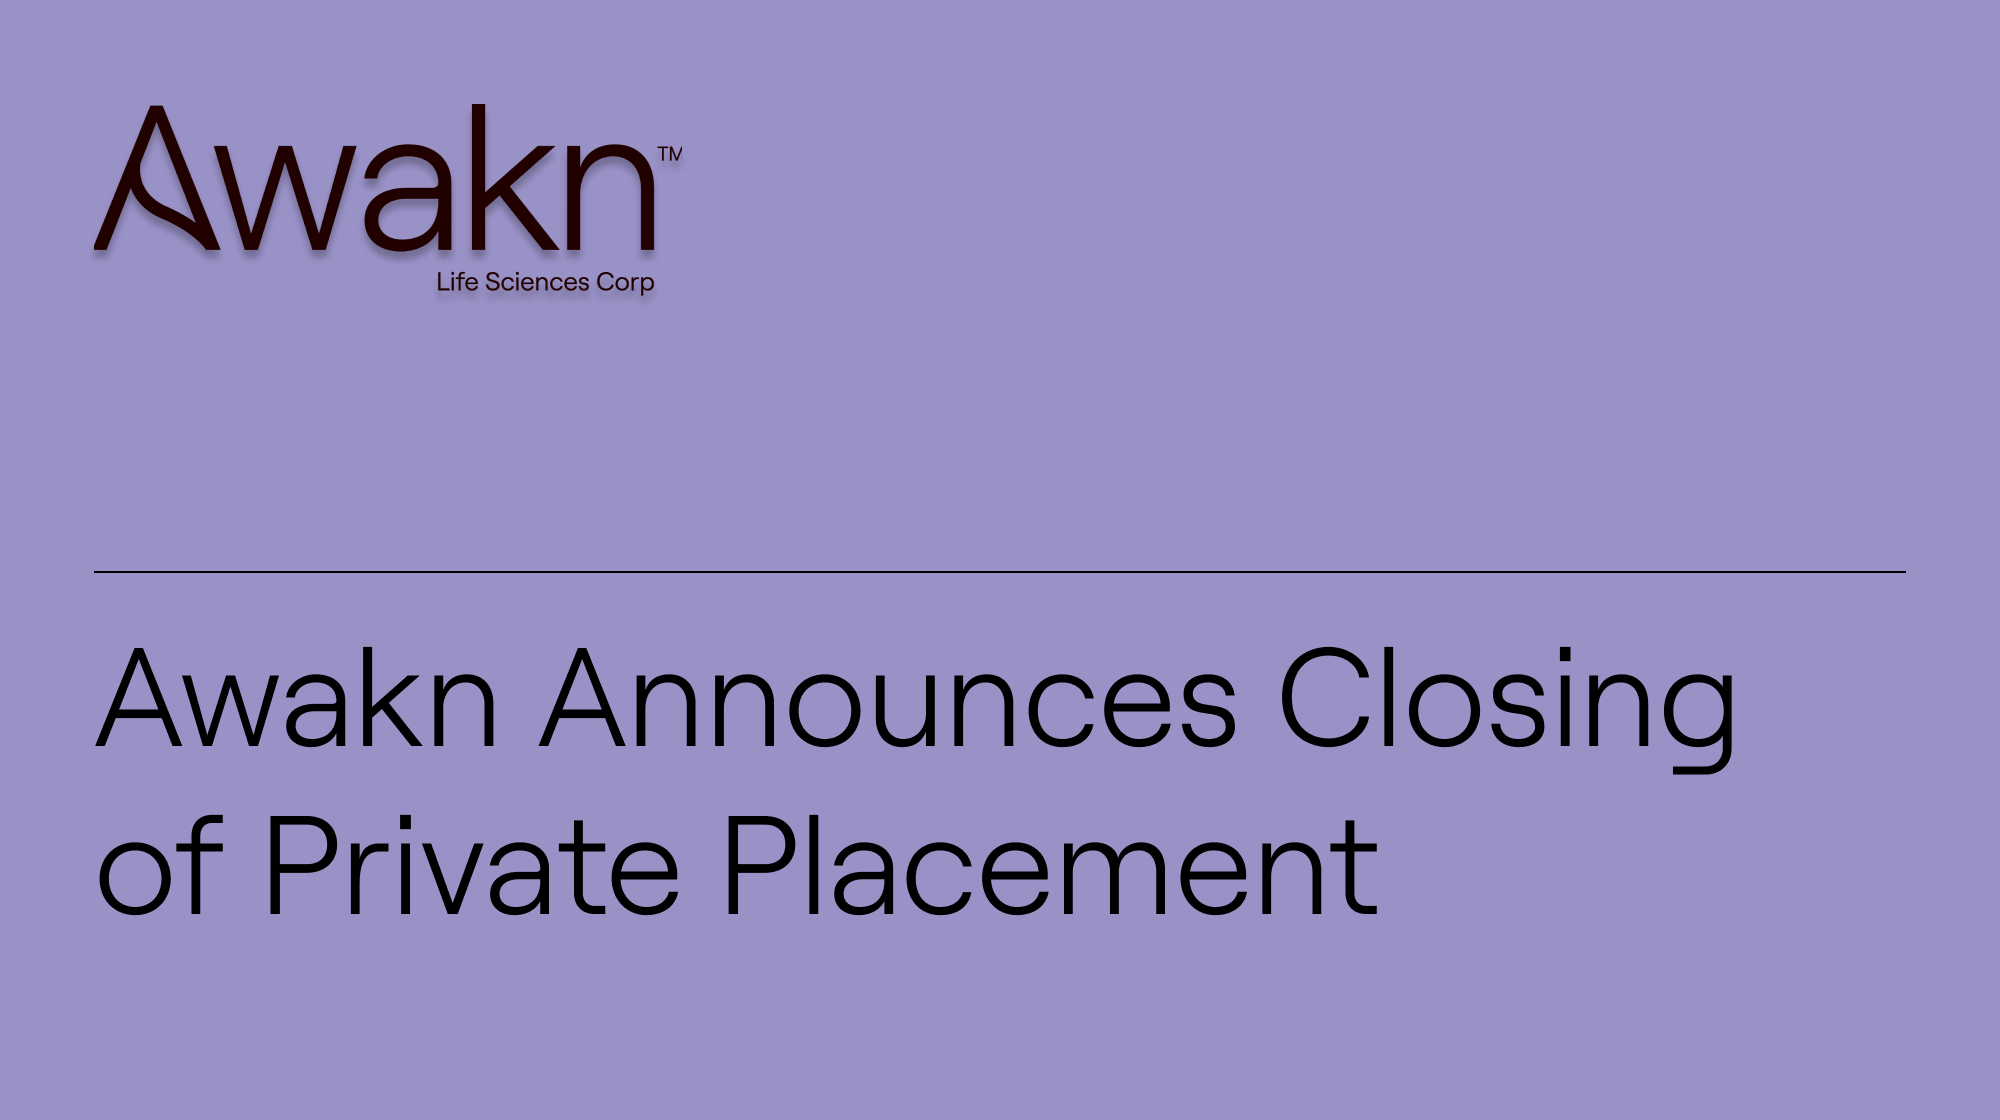 Awakn Announces Closing of Private Placement